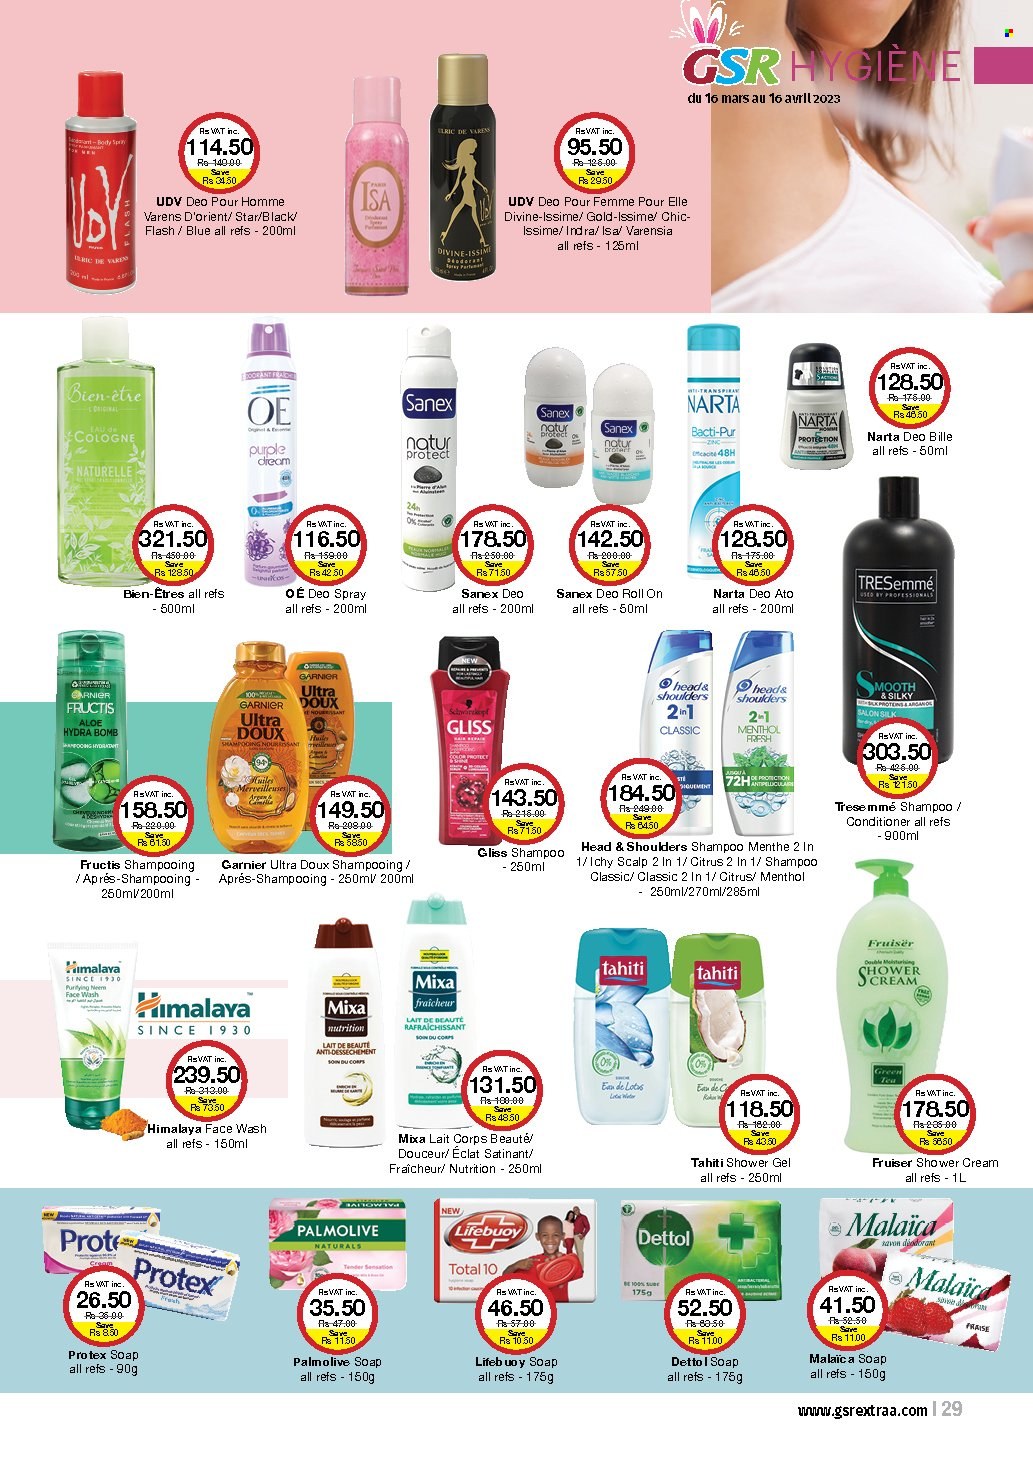 thumbnail - GSR Catalogue - 16.03.2023 - 16.04.2023 - Sales products - Mars, shower gel, Gliss, Palmolive, Protex, face gel, soap, Lifebuoy, face wash, conditioner, TRESemmé, Head & Shoulders, Fructis, body spray, Eclat, cologne, roll-on, Sanex, Lotus, Garnier, shampoo, Dettol, deodorant. Page 29.